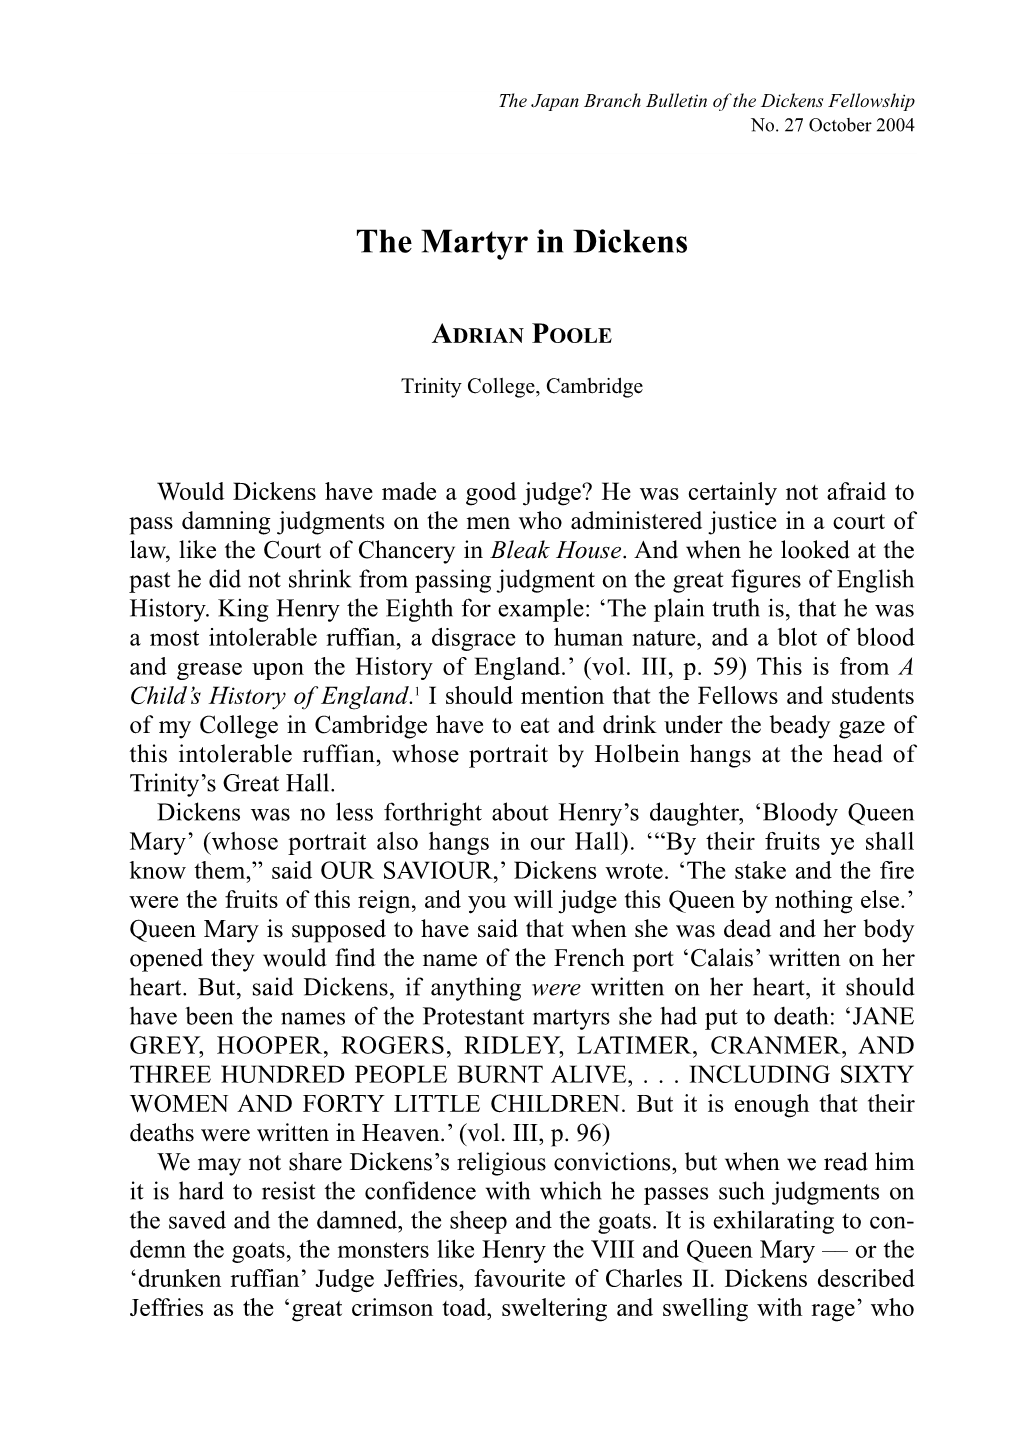 The Martyr in Dickens